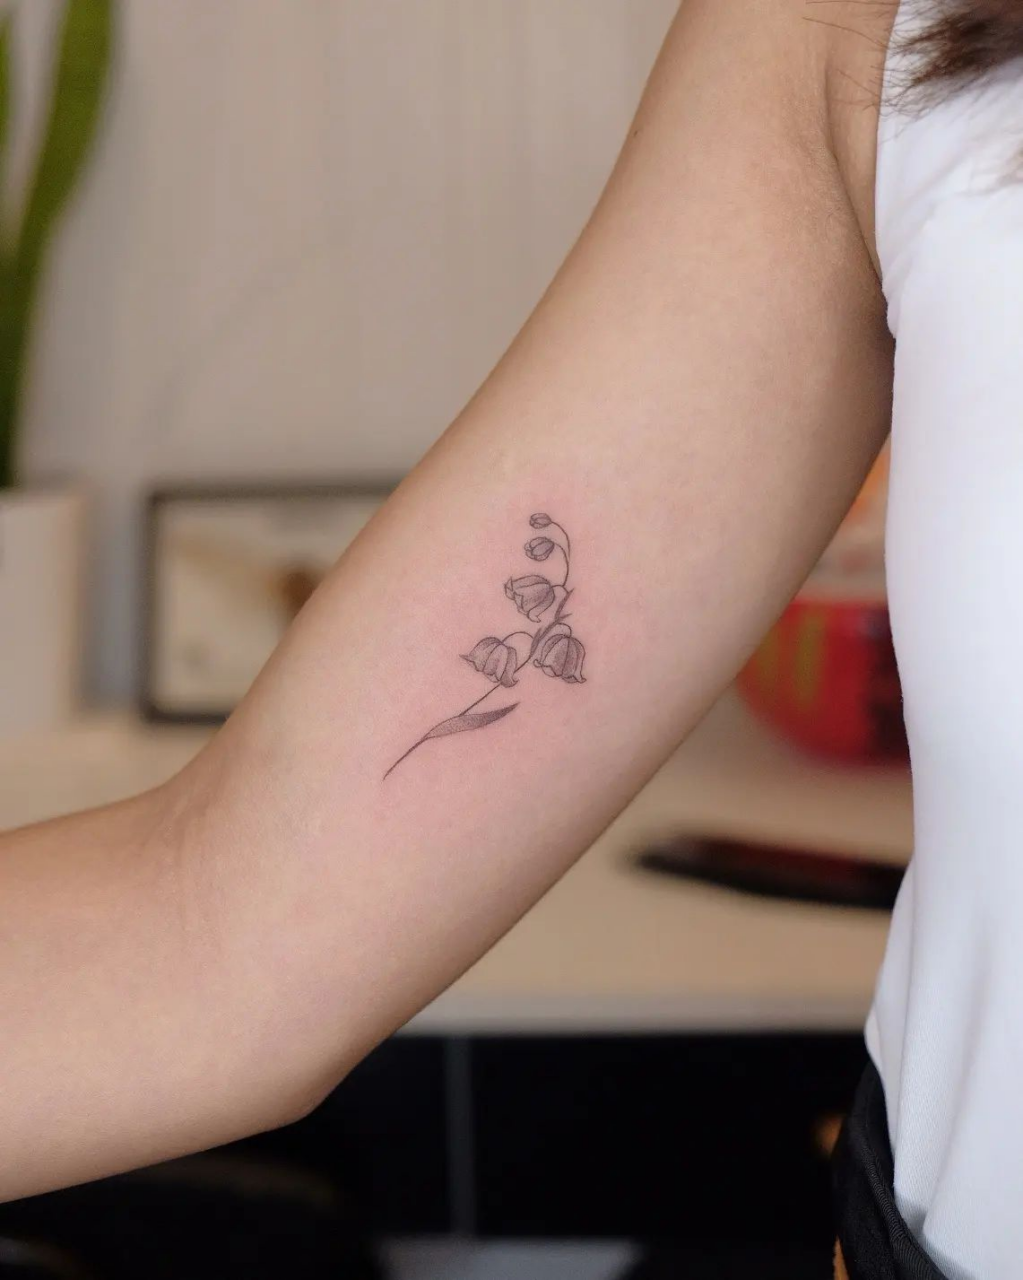 Artist uses plants as stencils for beautiful, delicate tattoos